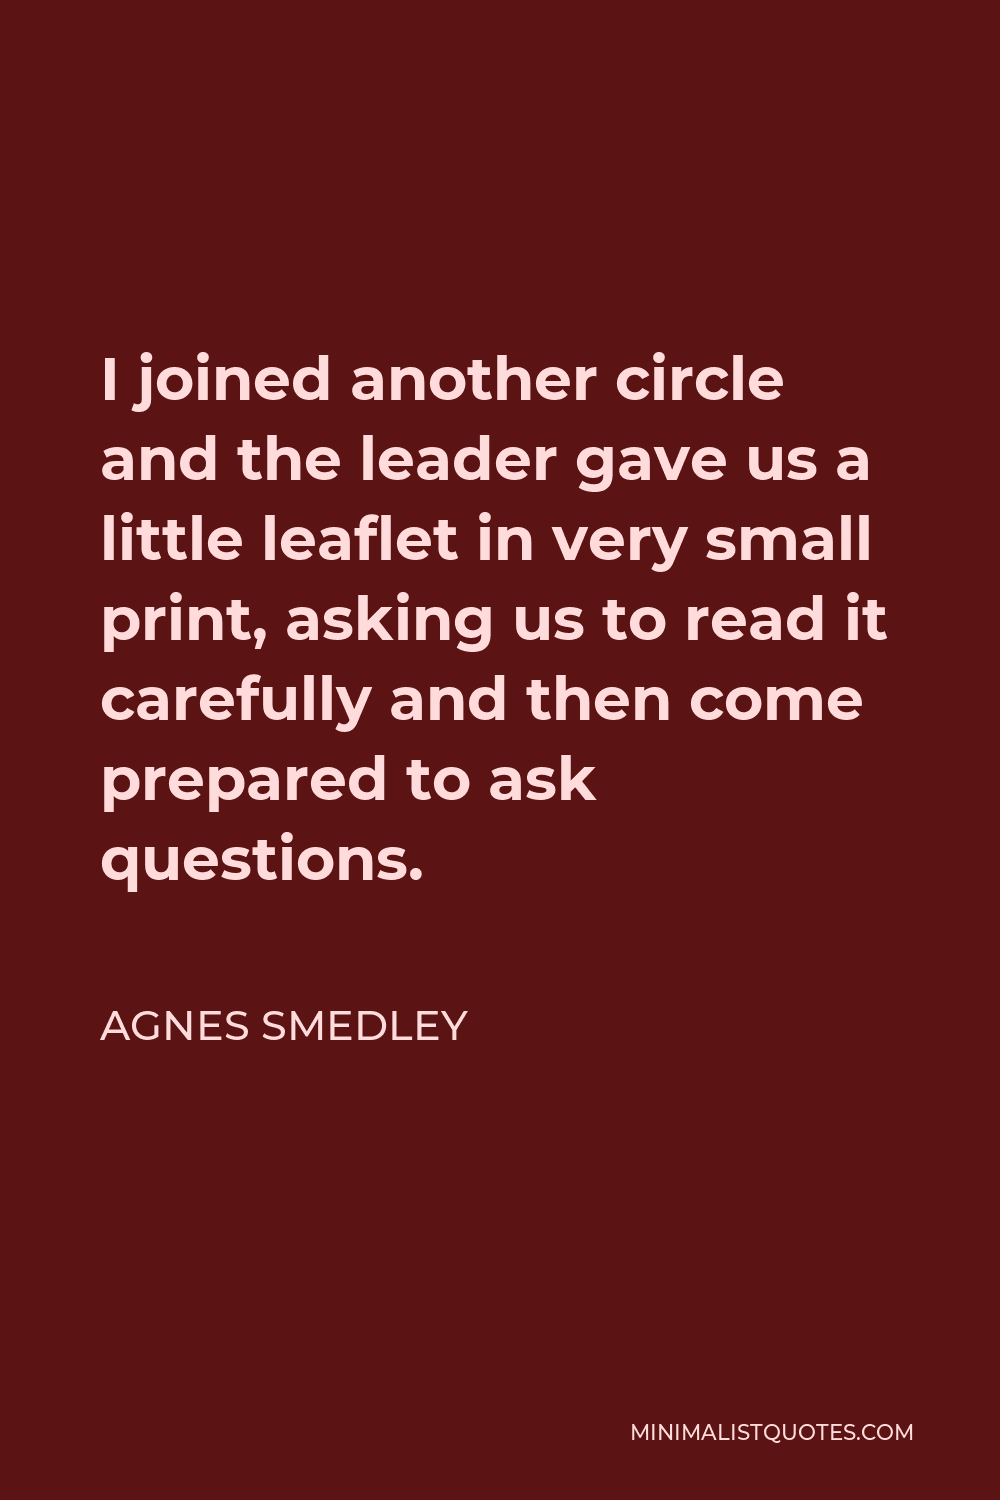 Agnes Smedley Quote - I joined another circle and the leader gave us a little leaflet in very small print, asking us to read it carefully and then come prepared to ask questions.